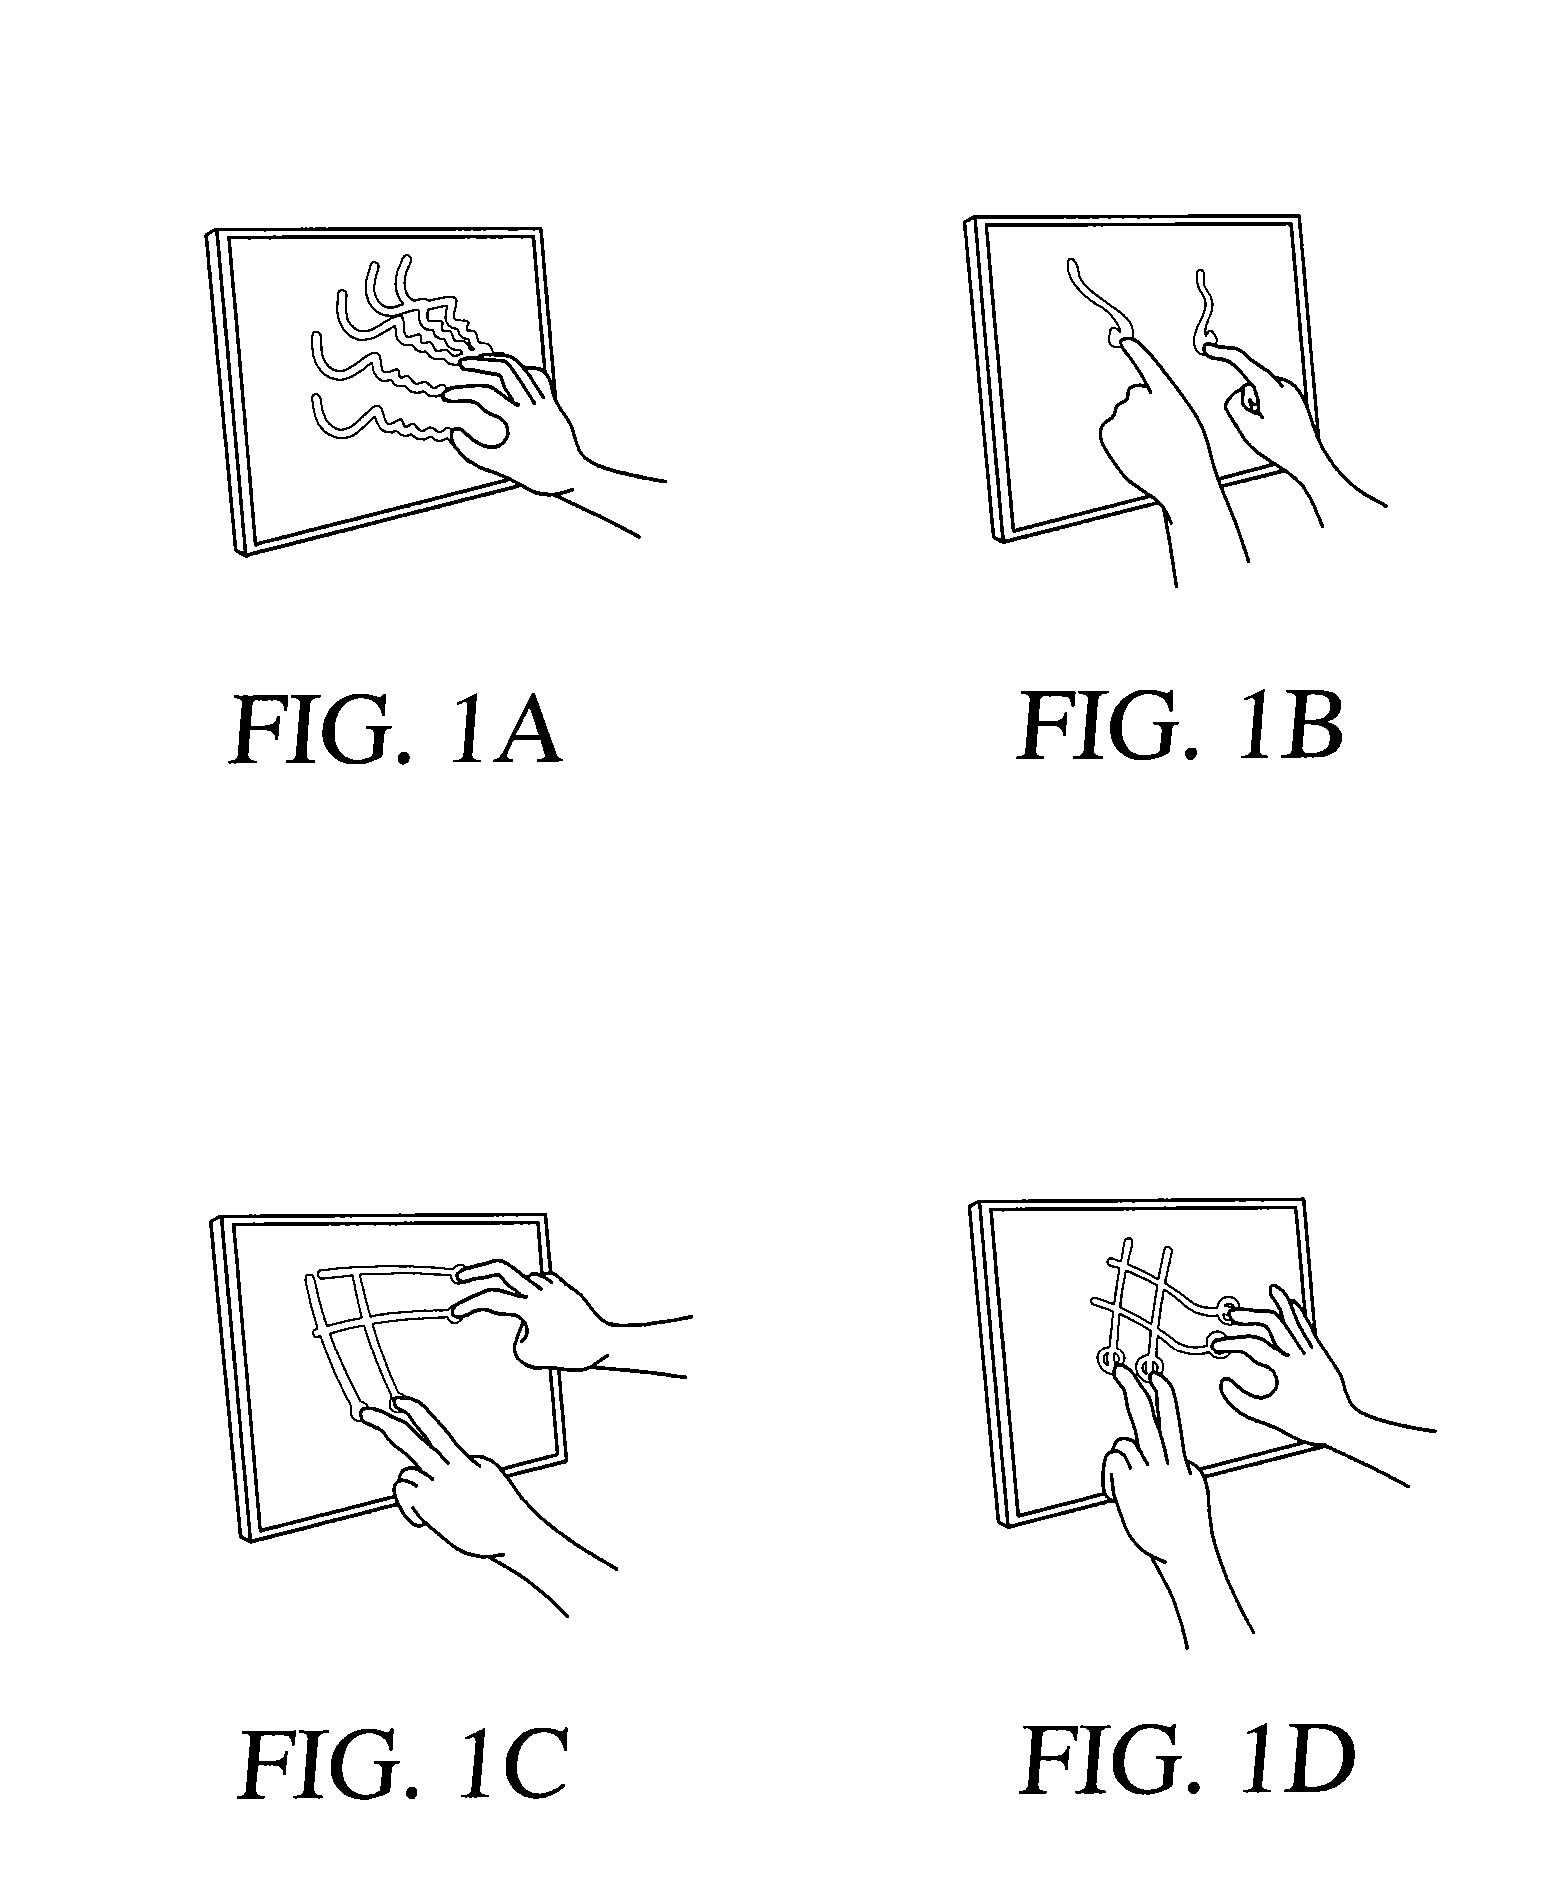 Multi-touch sensing display through frustrated total internal reflection